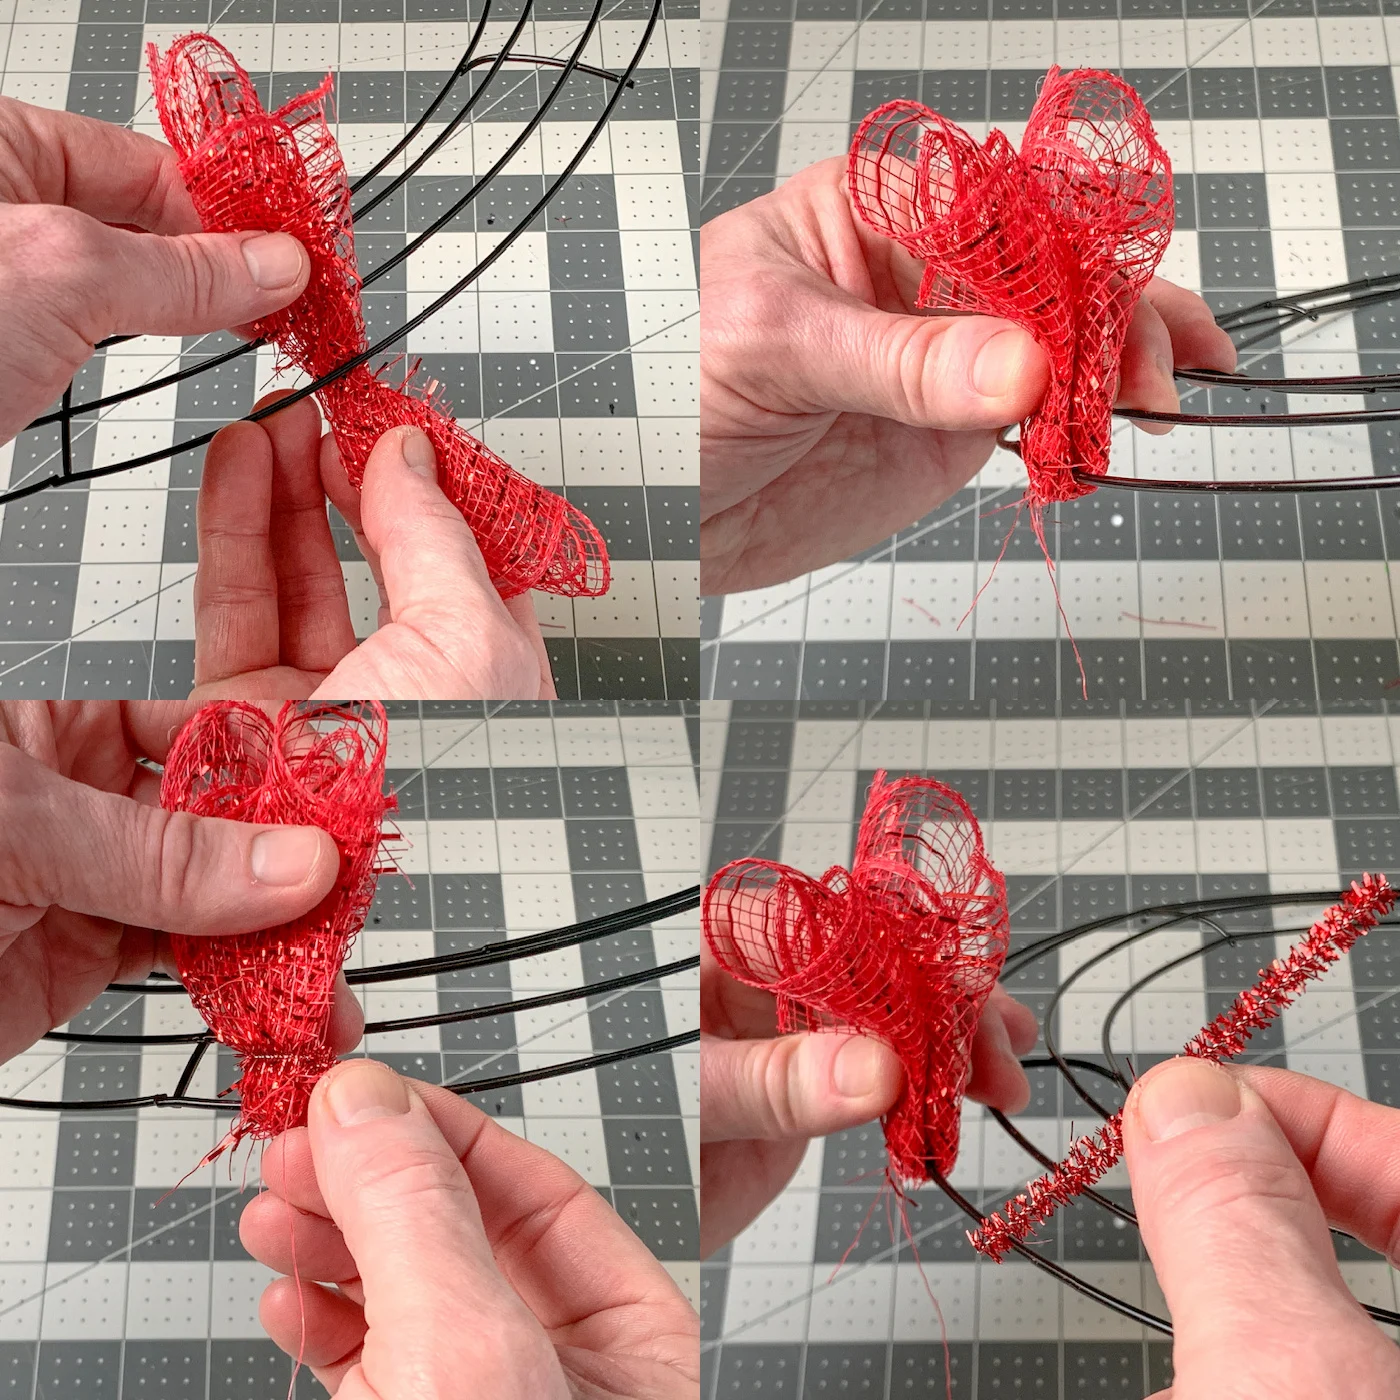 Wrapping a piece of mesh around the wire and attaching with a pipe cleaner